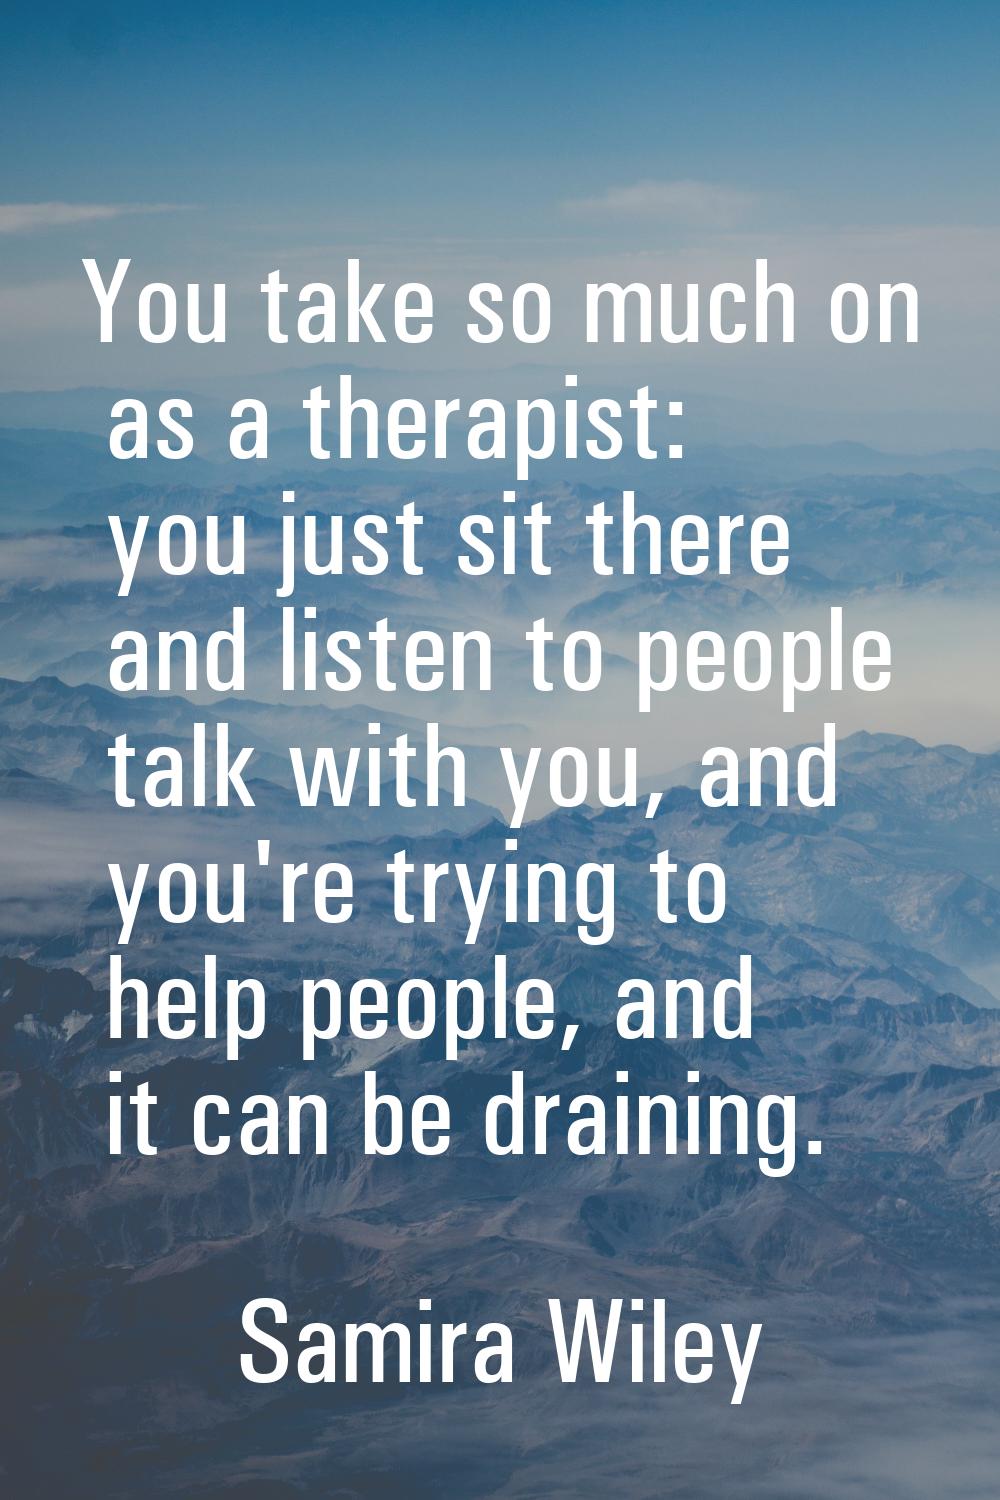 You take so much on as a therapist: you just sit there and listen to people talk with you, and you'